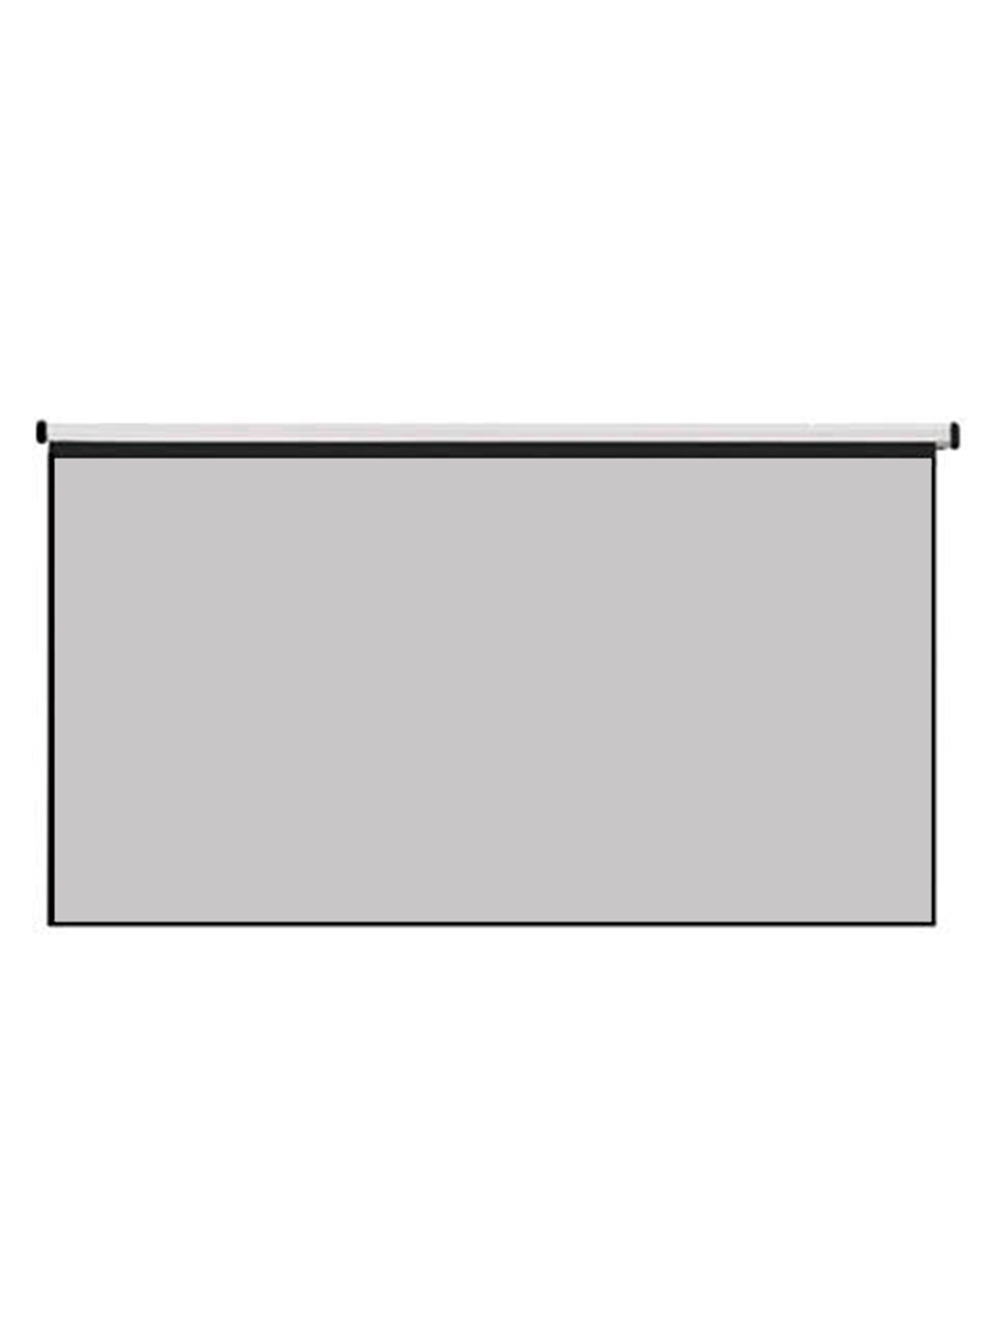 Find Thinyou Matte Gray Fabric Fiber Glass Wall hanging Projector Screen 100 inch 4 3 Projector Curtain for Home Theater Cinema Movies Projector for Sale on Gipsybee.com with cryptocurrencies